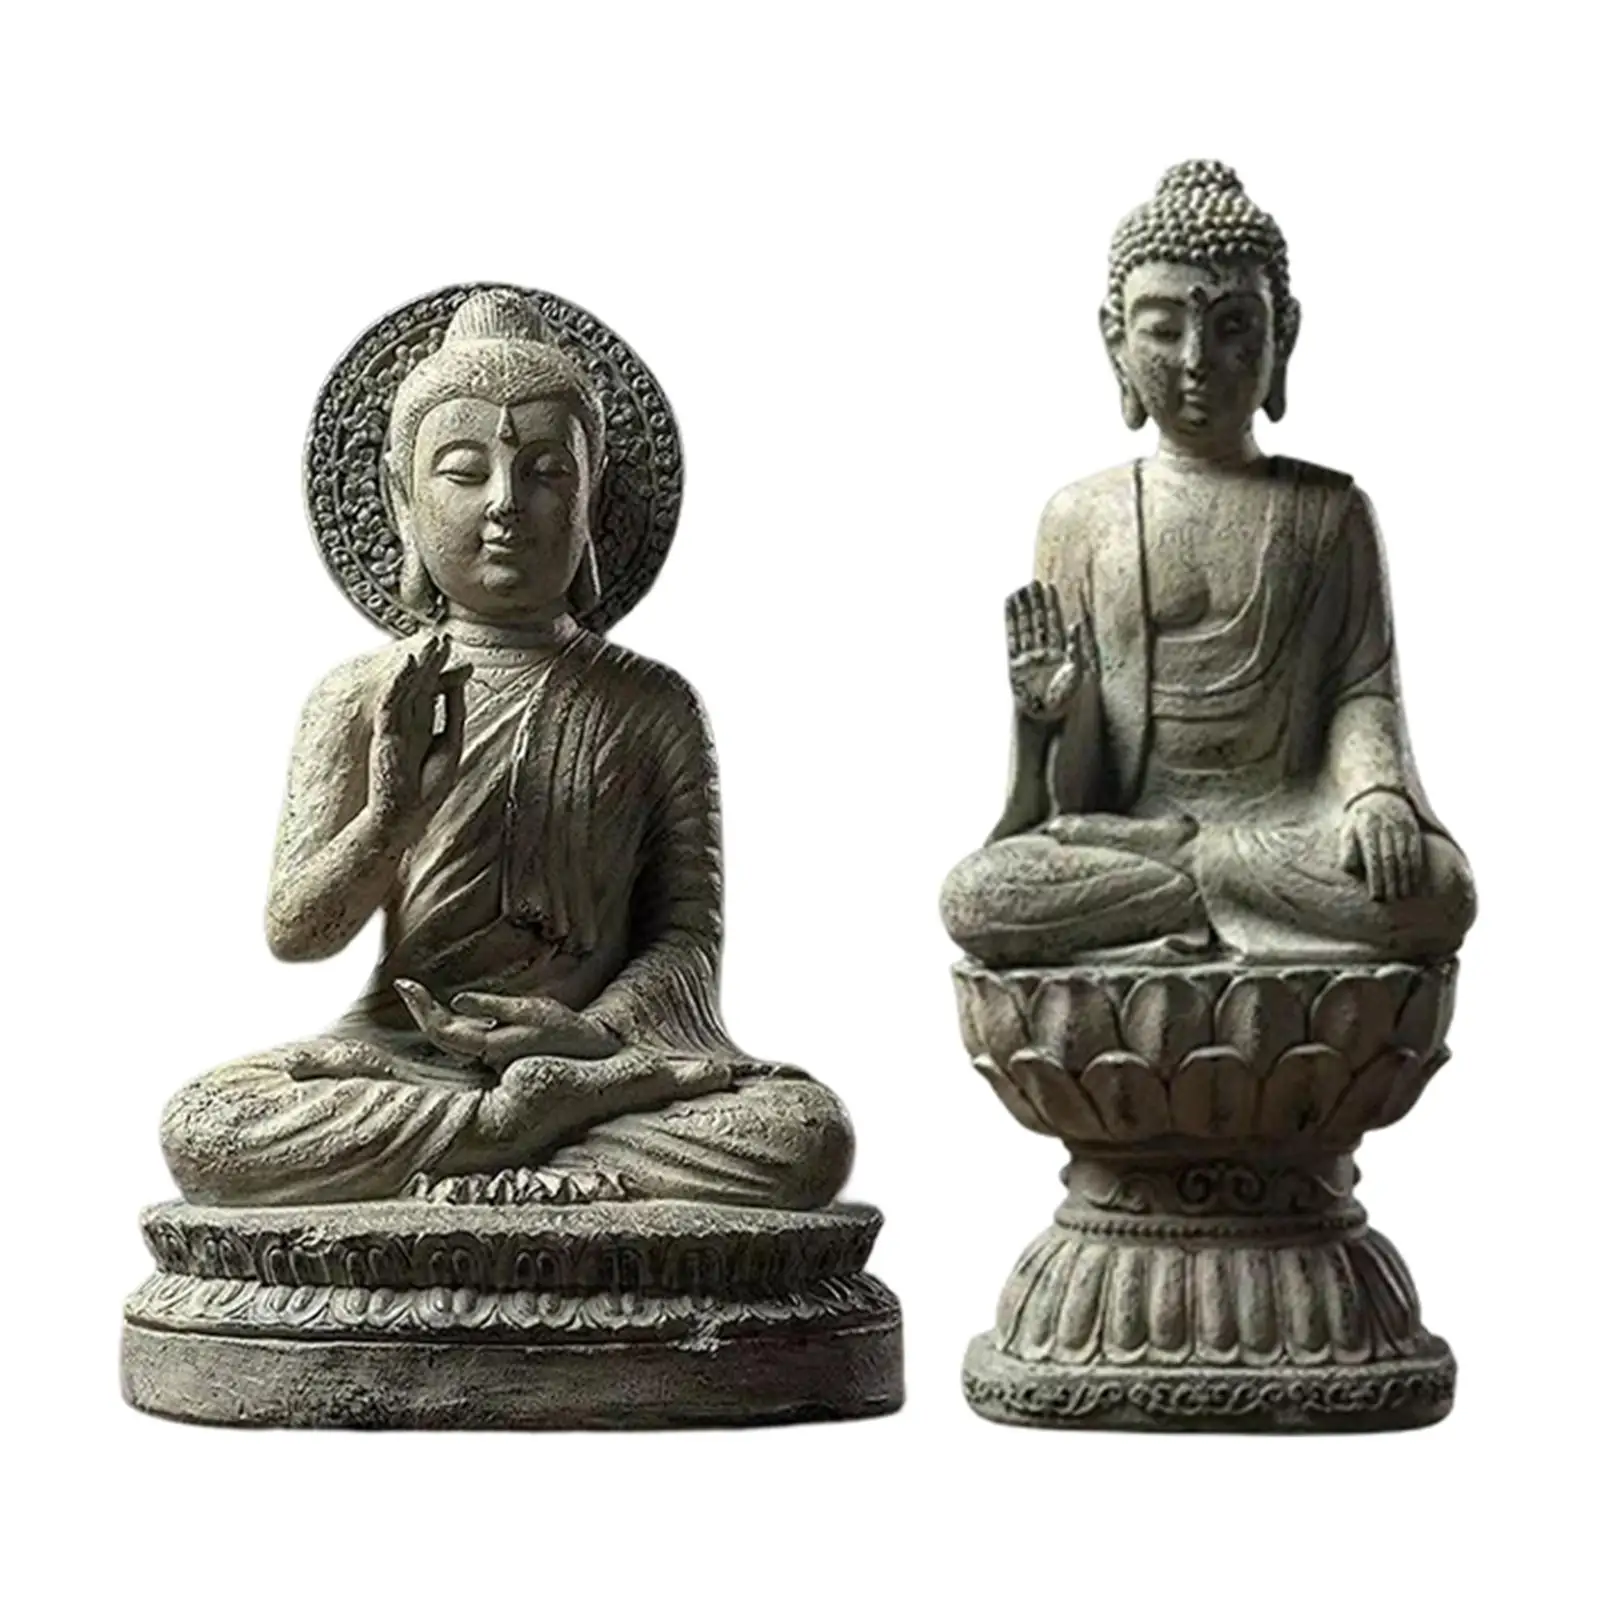 Resin Buddha Statue Figurine Enlightened One Sculpture Sitting Collection Small for Desk Home Decoration Ornament Crafts